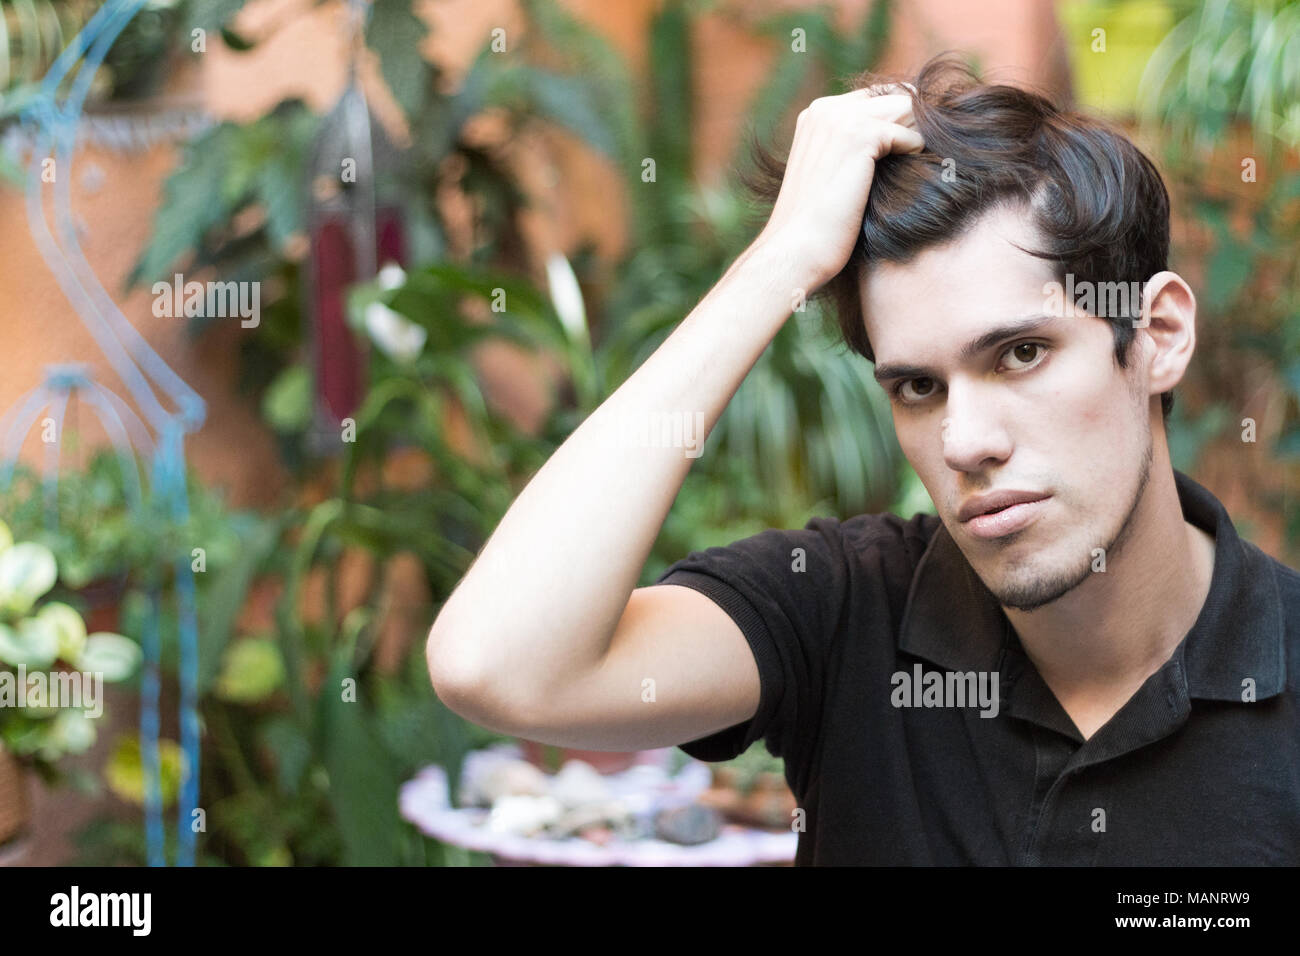 Portrait of a young man outdoors with his hand on his hair looking at camera, thinking and serious. Stock Photo